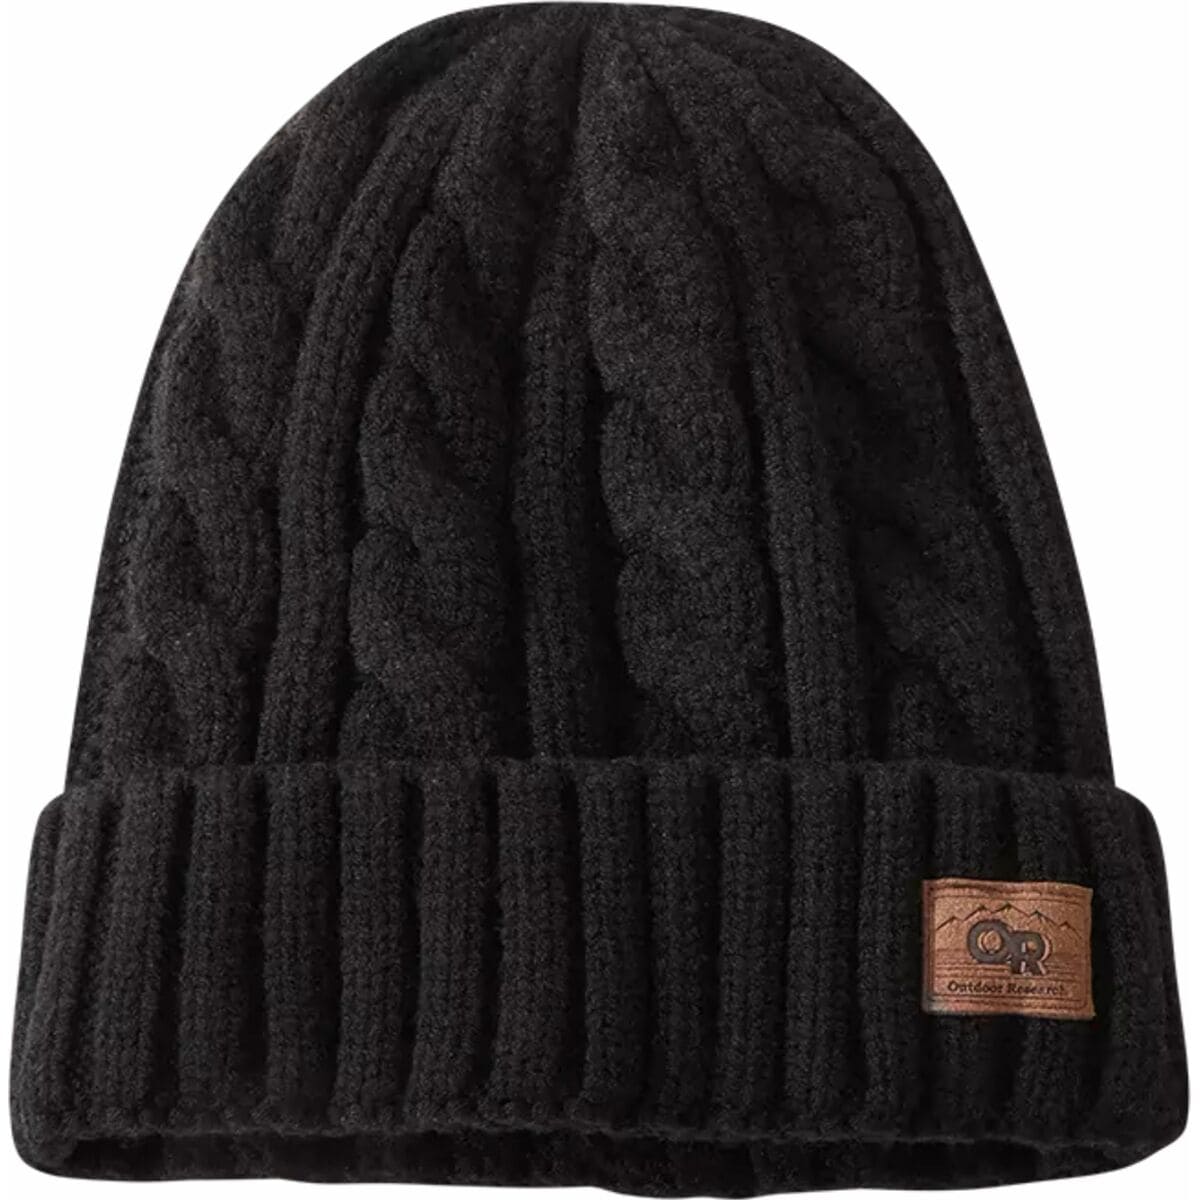 Outdoor Research Hashbrown Beanie - Accessories